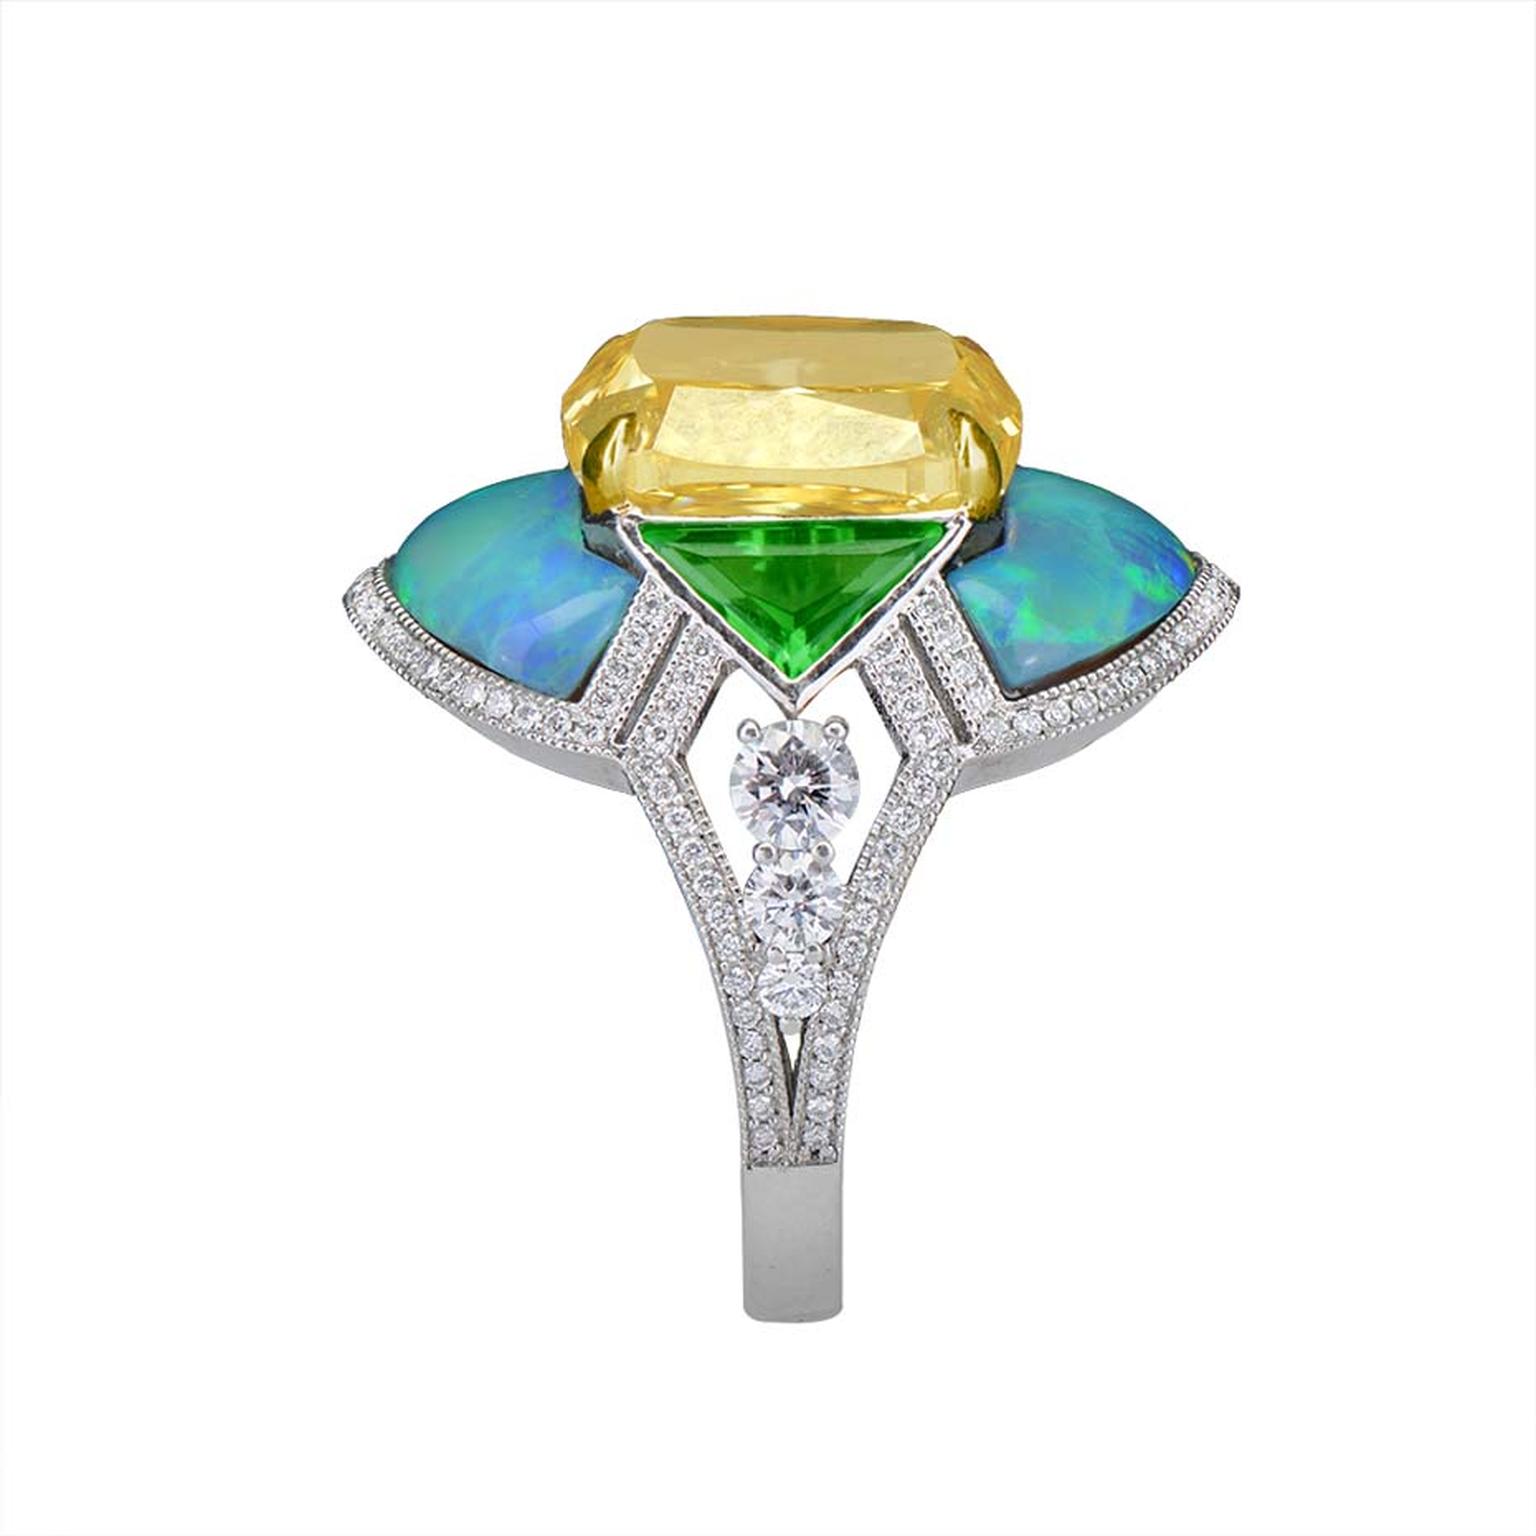 David Abramov, Morelle Davidson's Sales Executive and Website Manager, says of its yellow diamond ring: "As a jeweller that primarily works with antique and period jewellery, we were able to create a modern interpretation of the Art Deco period and make i